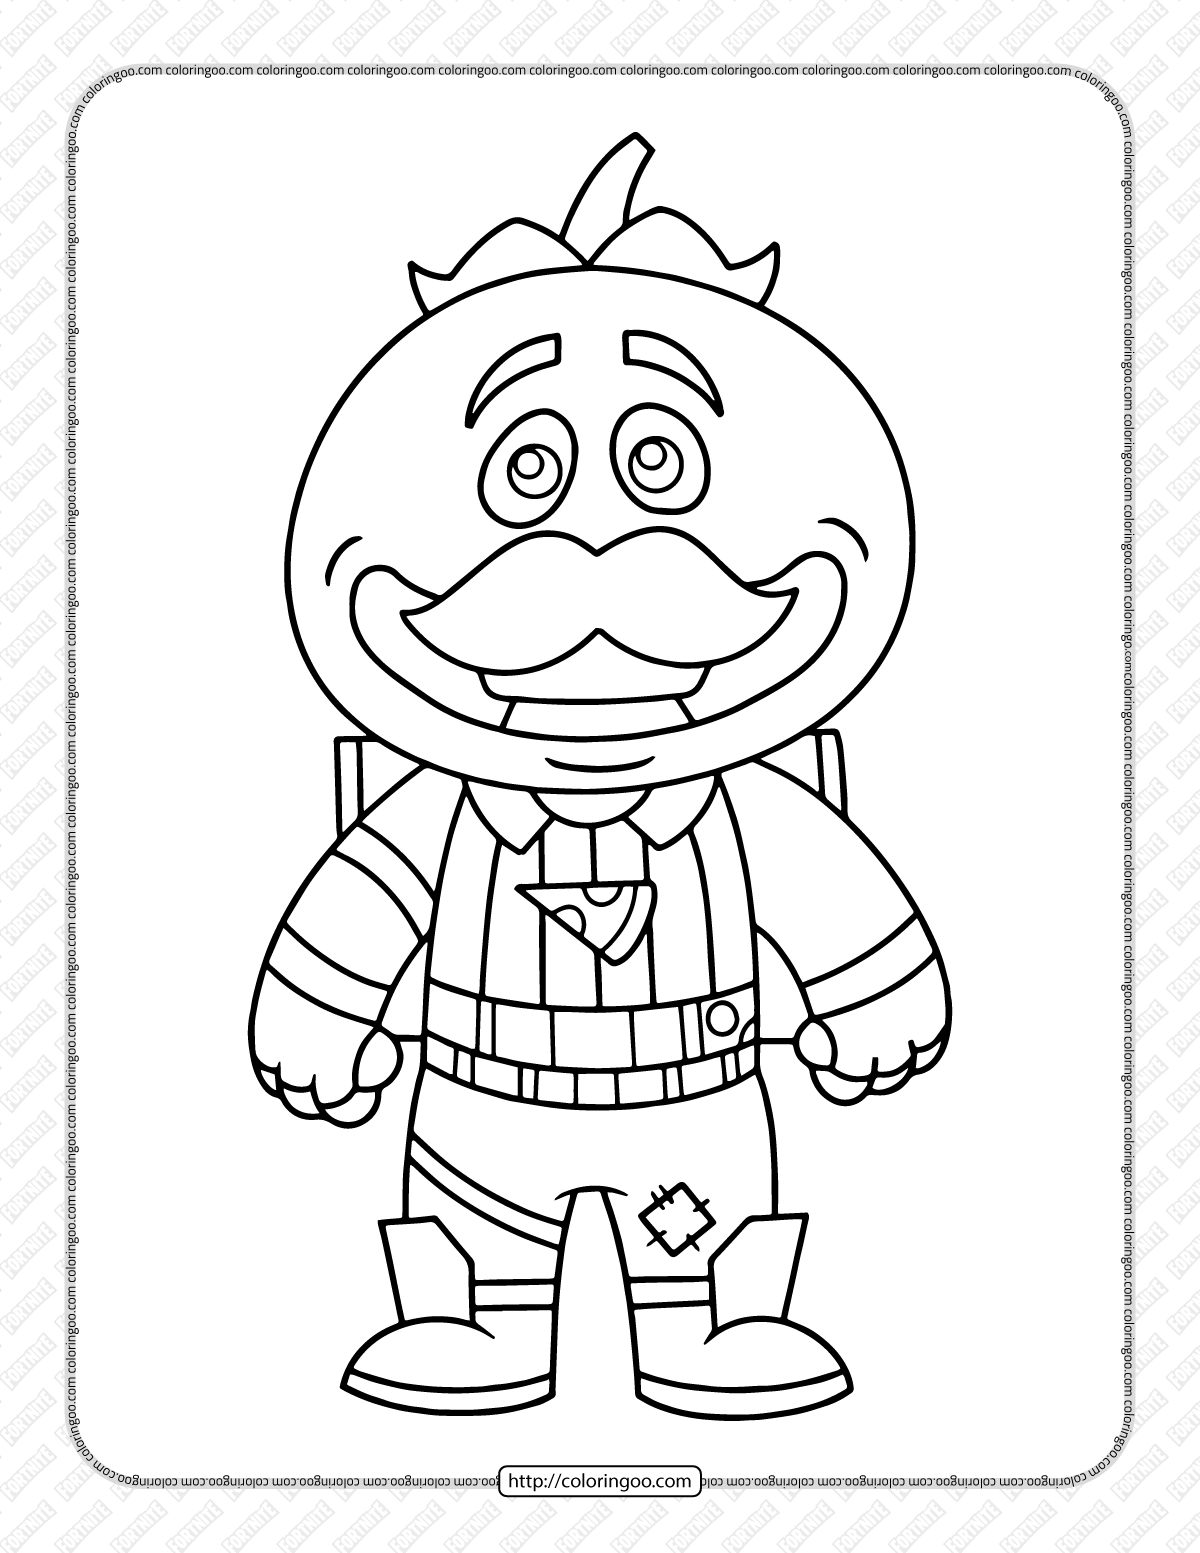 chibi fortnite coloring pages 31